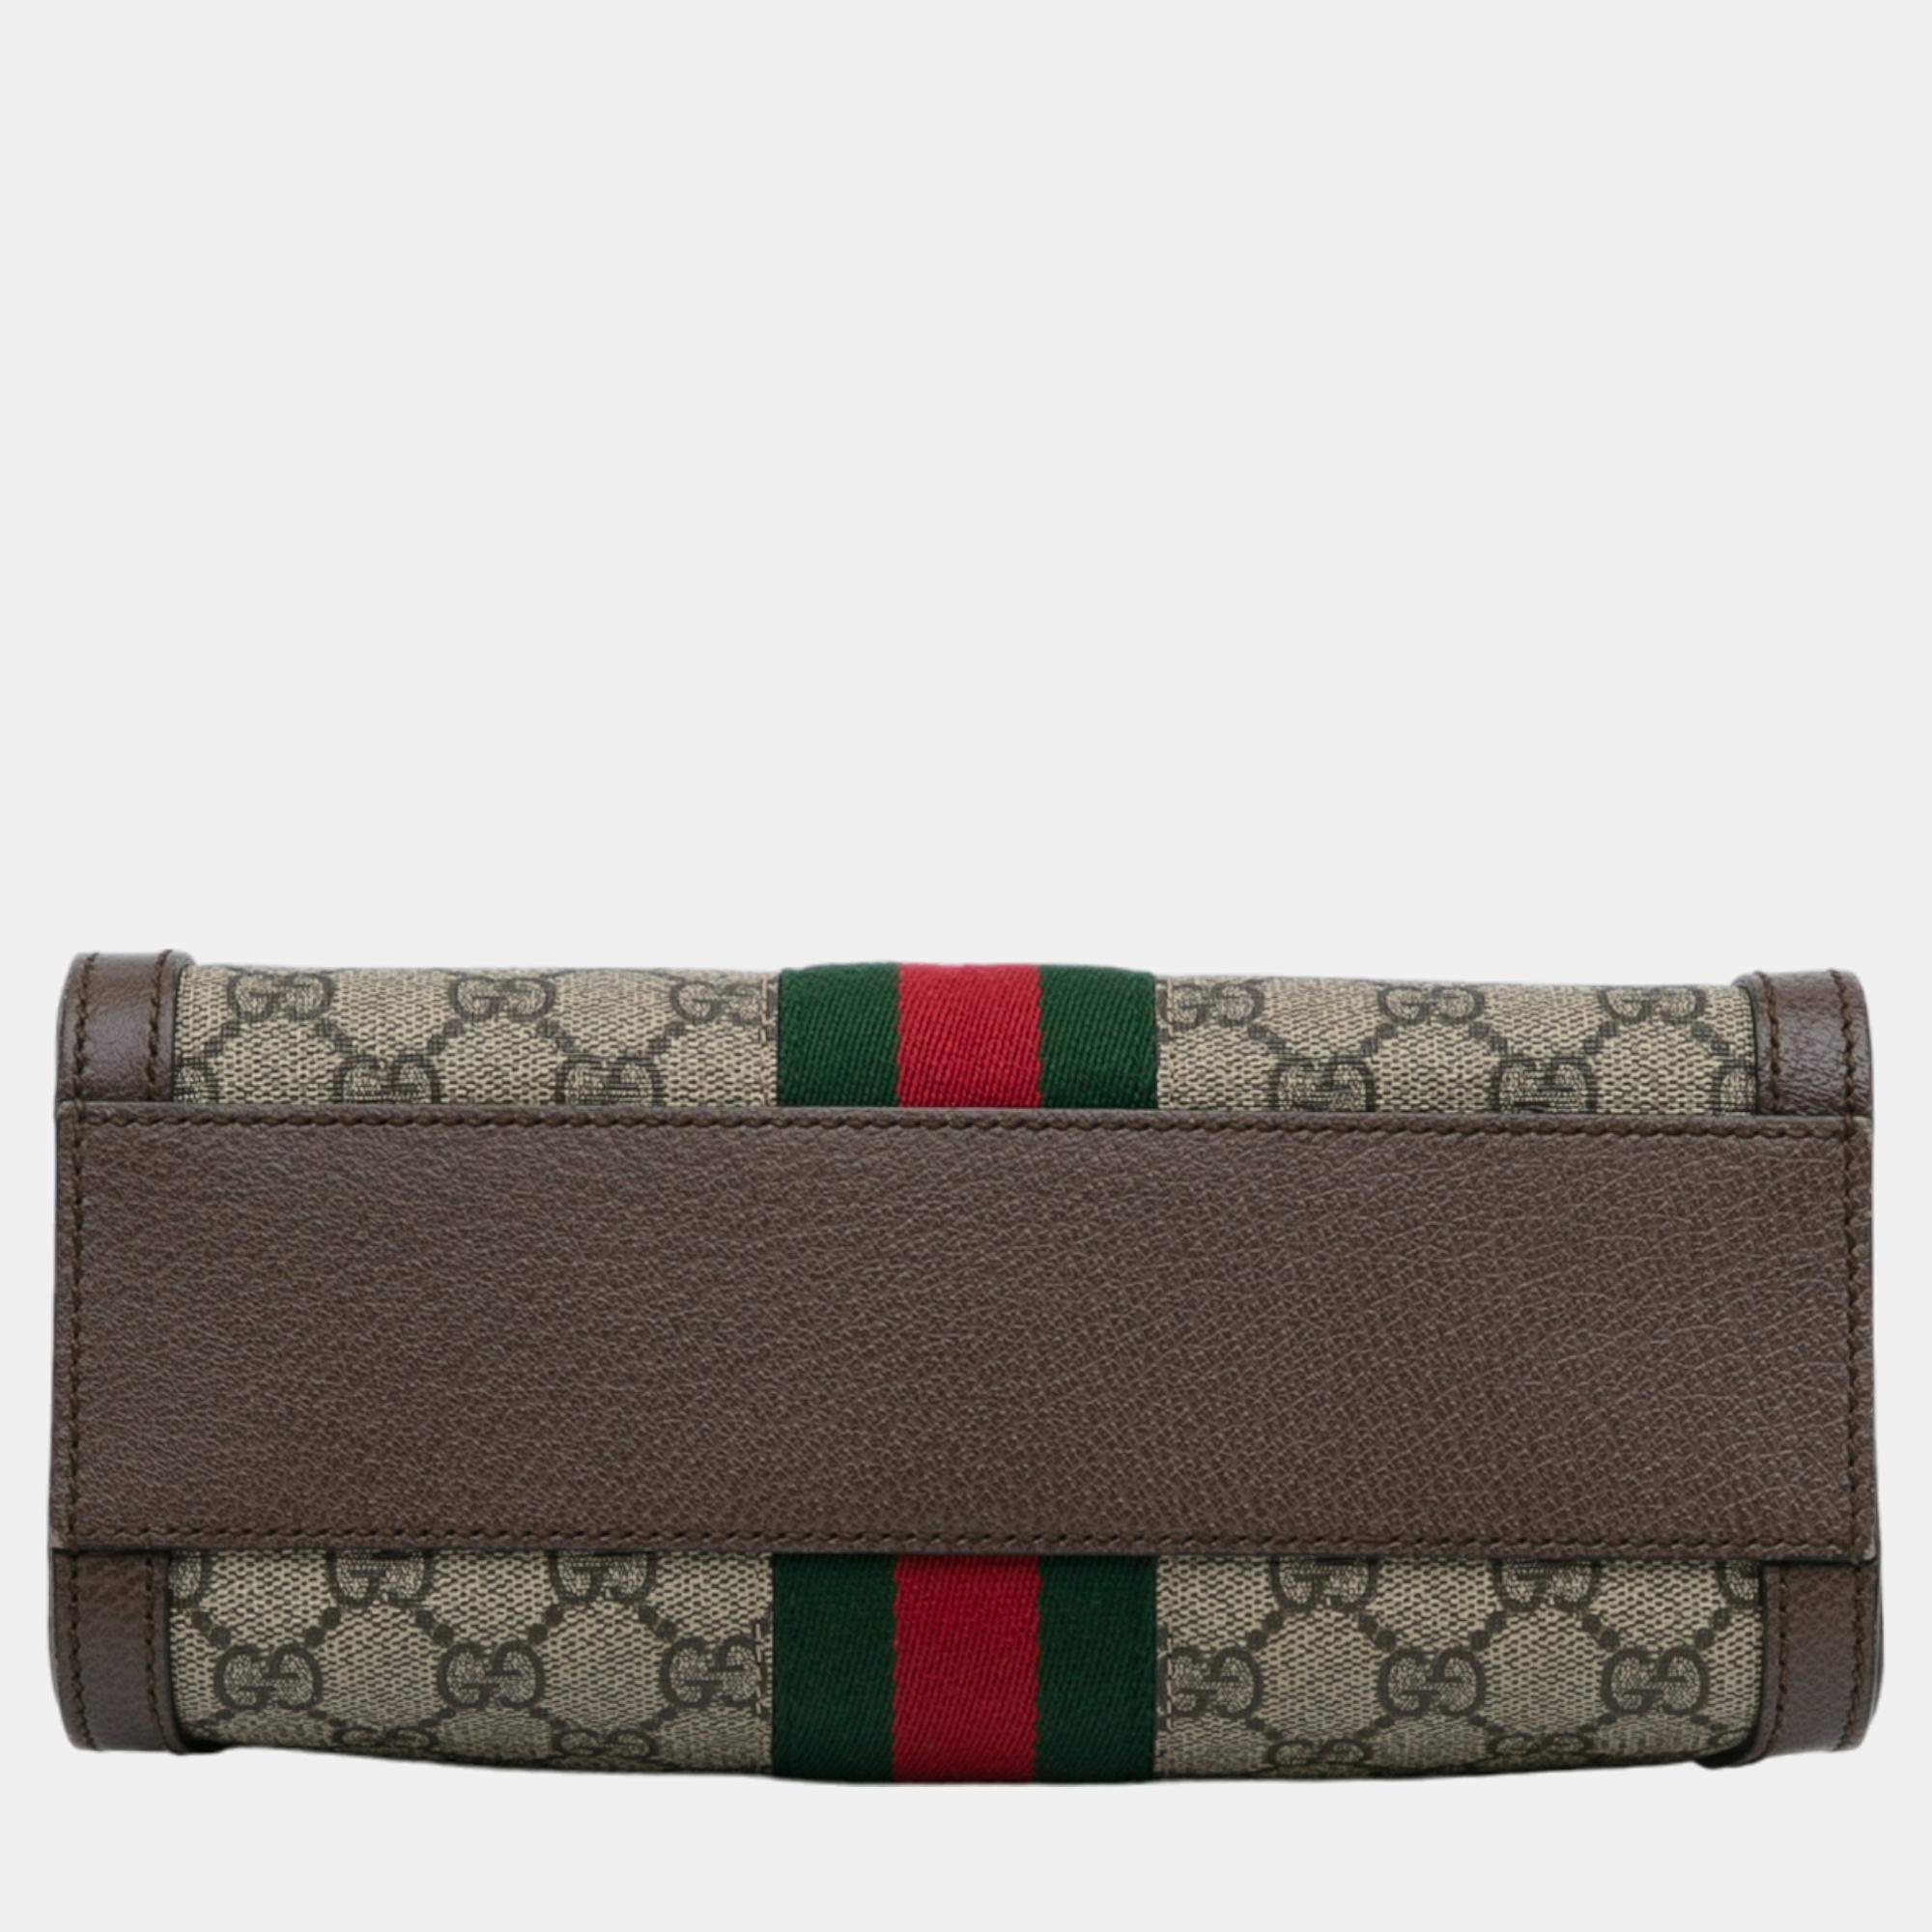 Gucci Beige/Brown Small GG Supreme Ophidia Satchel